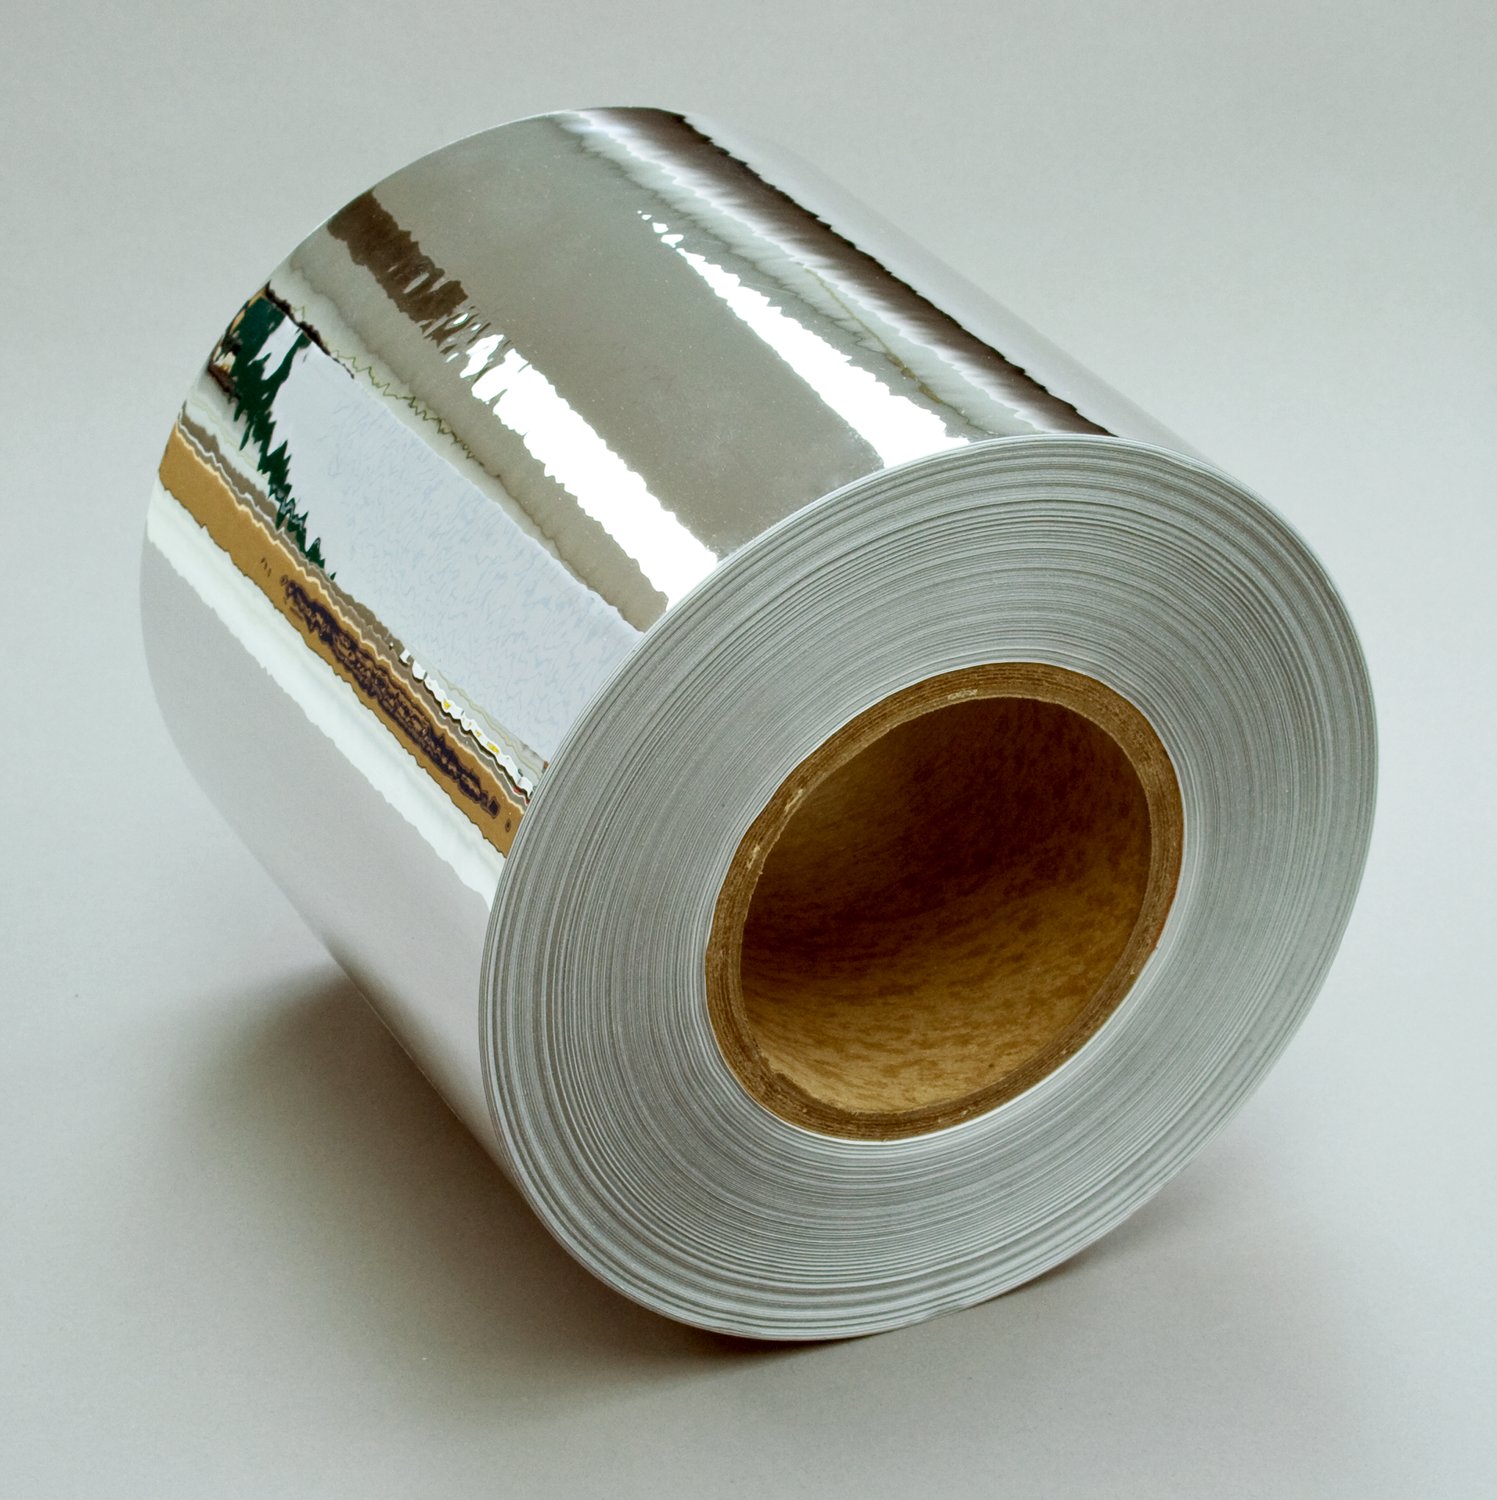 7100013367 - 3M Sheet and Screen Label Material 7924, Bright Silver Polyester Gloss,
Roll, Config